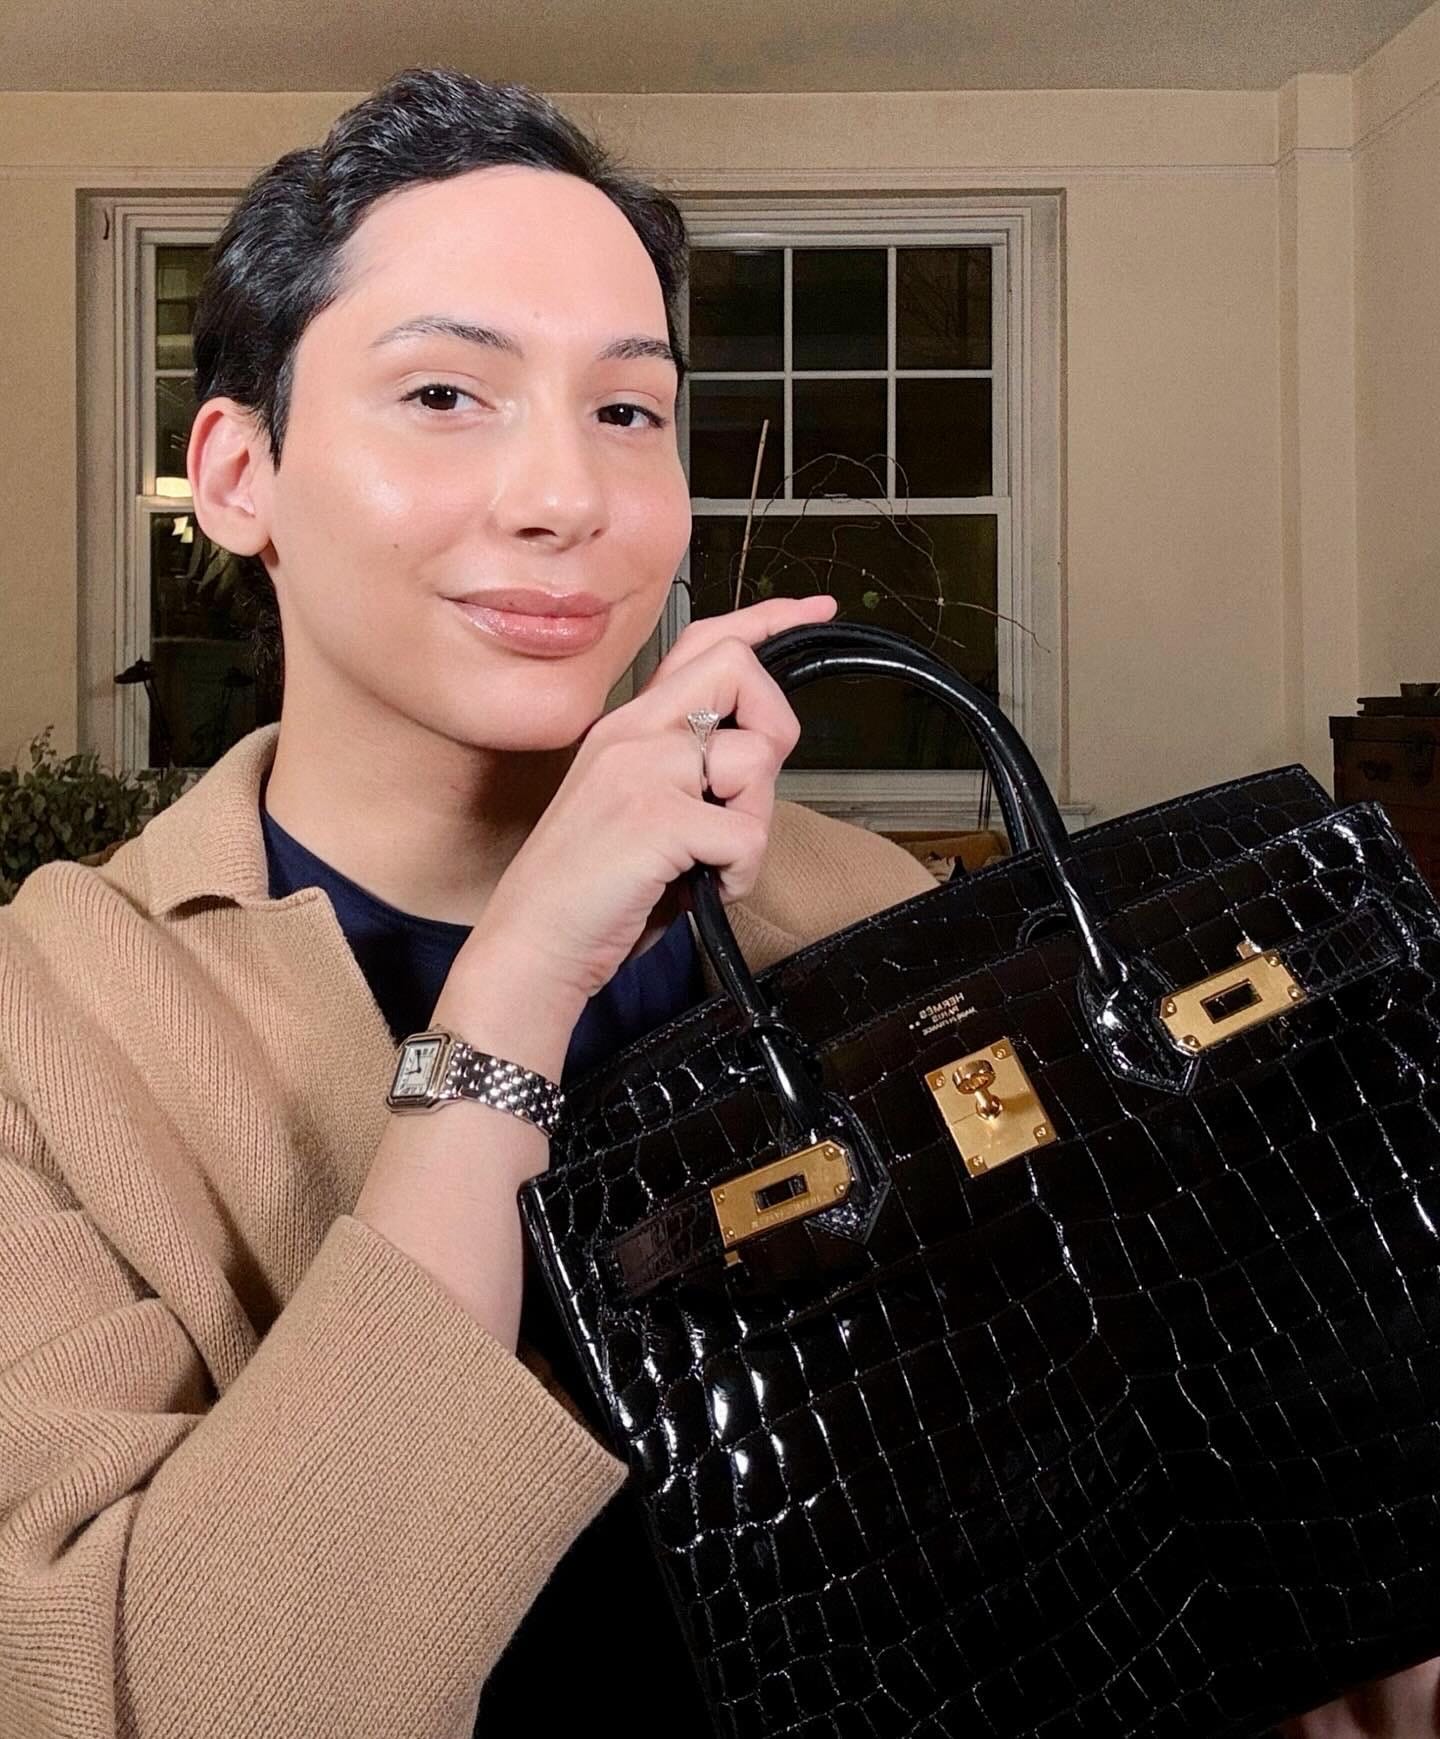 <p>Hermès has three Paris locations where your likelihood of securing a Birkin is much higher. Anghel said you don't have to worry about building a relationship with a sales associate in Paris.</p><p>Influencers who scored a Birkin at one of these stores say to <a href="https://appointment.hermes.com/" rel="noopener">book a leather goods appointment</a> the day before a planned visit. But be warned: You may not get one. Anghel, who has gotten an appointment before, told BI that it's basically a "lottery system."</p>     <p>And if all else fails, buy pre-owned.</p><p>Gross, who has worked with the consignment brand Fashionphile, said he would much rather purchase secondhand at this point in his Hermès journey.</p><p>"I recently purchased a black Birkin 30 in crocodile," Gross said. "If I asked for that at the store. I don't know how long it would take. I don't know what they would offer me."</p><p>However, a Birkin or Kelly can sometimes be more expensive on the secondhand market because of the <a href="https://affiliate.insider.com?amazonTrackingID=biauto-51300-20&h=25f02557786ff7cc49e19c4fd25e7618f85dc4fb89f6ed93a5a0994a1e6daf71&platform=msn_reviews&postID=61b8efdbf2a36b1ac9f49464&postSlug=guides%2Fstyle%2Fhow-to-buy-a-birkin-bag&site=bi&u=https%3A%2F%2Fwww.sothebys.com%2Fen%2Farticles%2Fwhat-influences-an-hermes-birkin-bag-price%23%3A~%3Atext%3DMany%2520factors%2520influence%2520a%2520Birkin%2CBirkin%252035%2520or%2520Birkin%252040.&utm_source=msn_reviews" rel="noopener">high demand</a> as more people look to invest.</p><p>Gross pointed out that buying used means you don't have to spend time establishing a good rapport with an associate.</p><p>The secondhand market has other advantages. You can try on bags to see if they work for you, browse different colors and sizes, and get a bag much sooner than you would new. At some places, like Fashionphile, you can access horseshoe Birkins — bespoke Birkins offered to VIP clients of Hermès and finished off with a tiny horseshoe stamp.</p><p>Lara Osborn, the company's vice president of procurement and authentication, told BI it buys and sells these super-exclusive bags at their stores.</p><p>"Nobody has to know that you weren't the special customer that was offered this special, unique experience to build your bag because you're carrying it," she said. "We'll never tell anyone that somebody picked it out before you."</p>